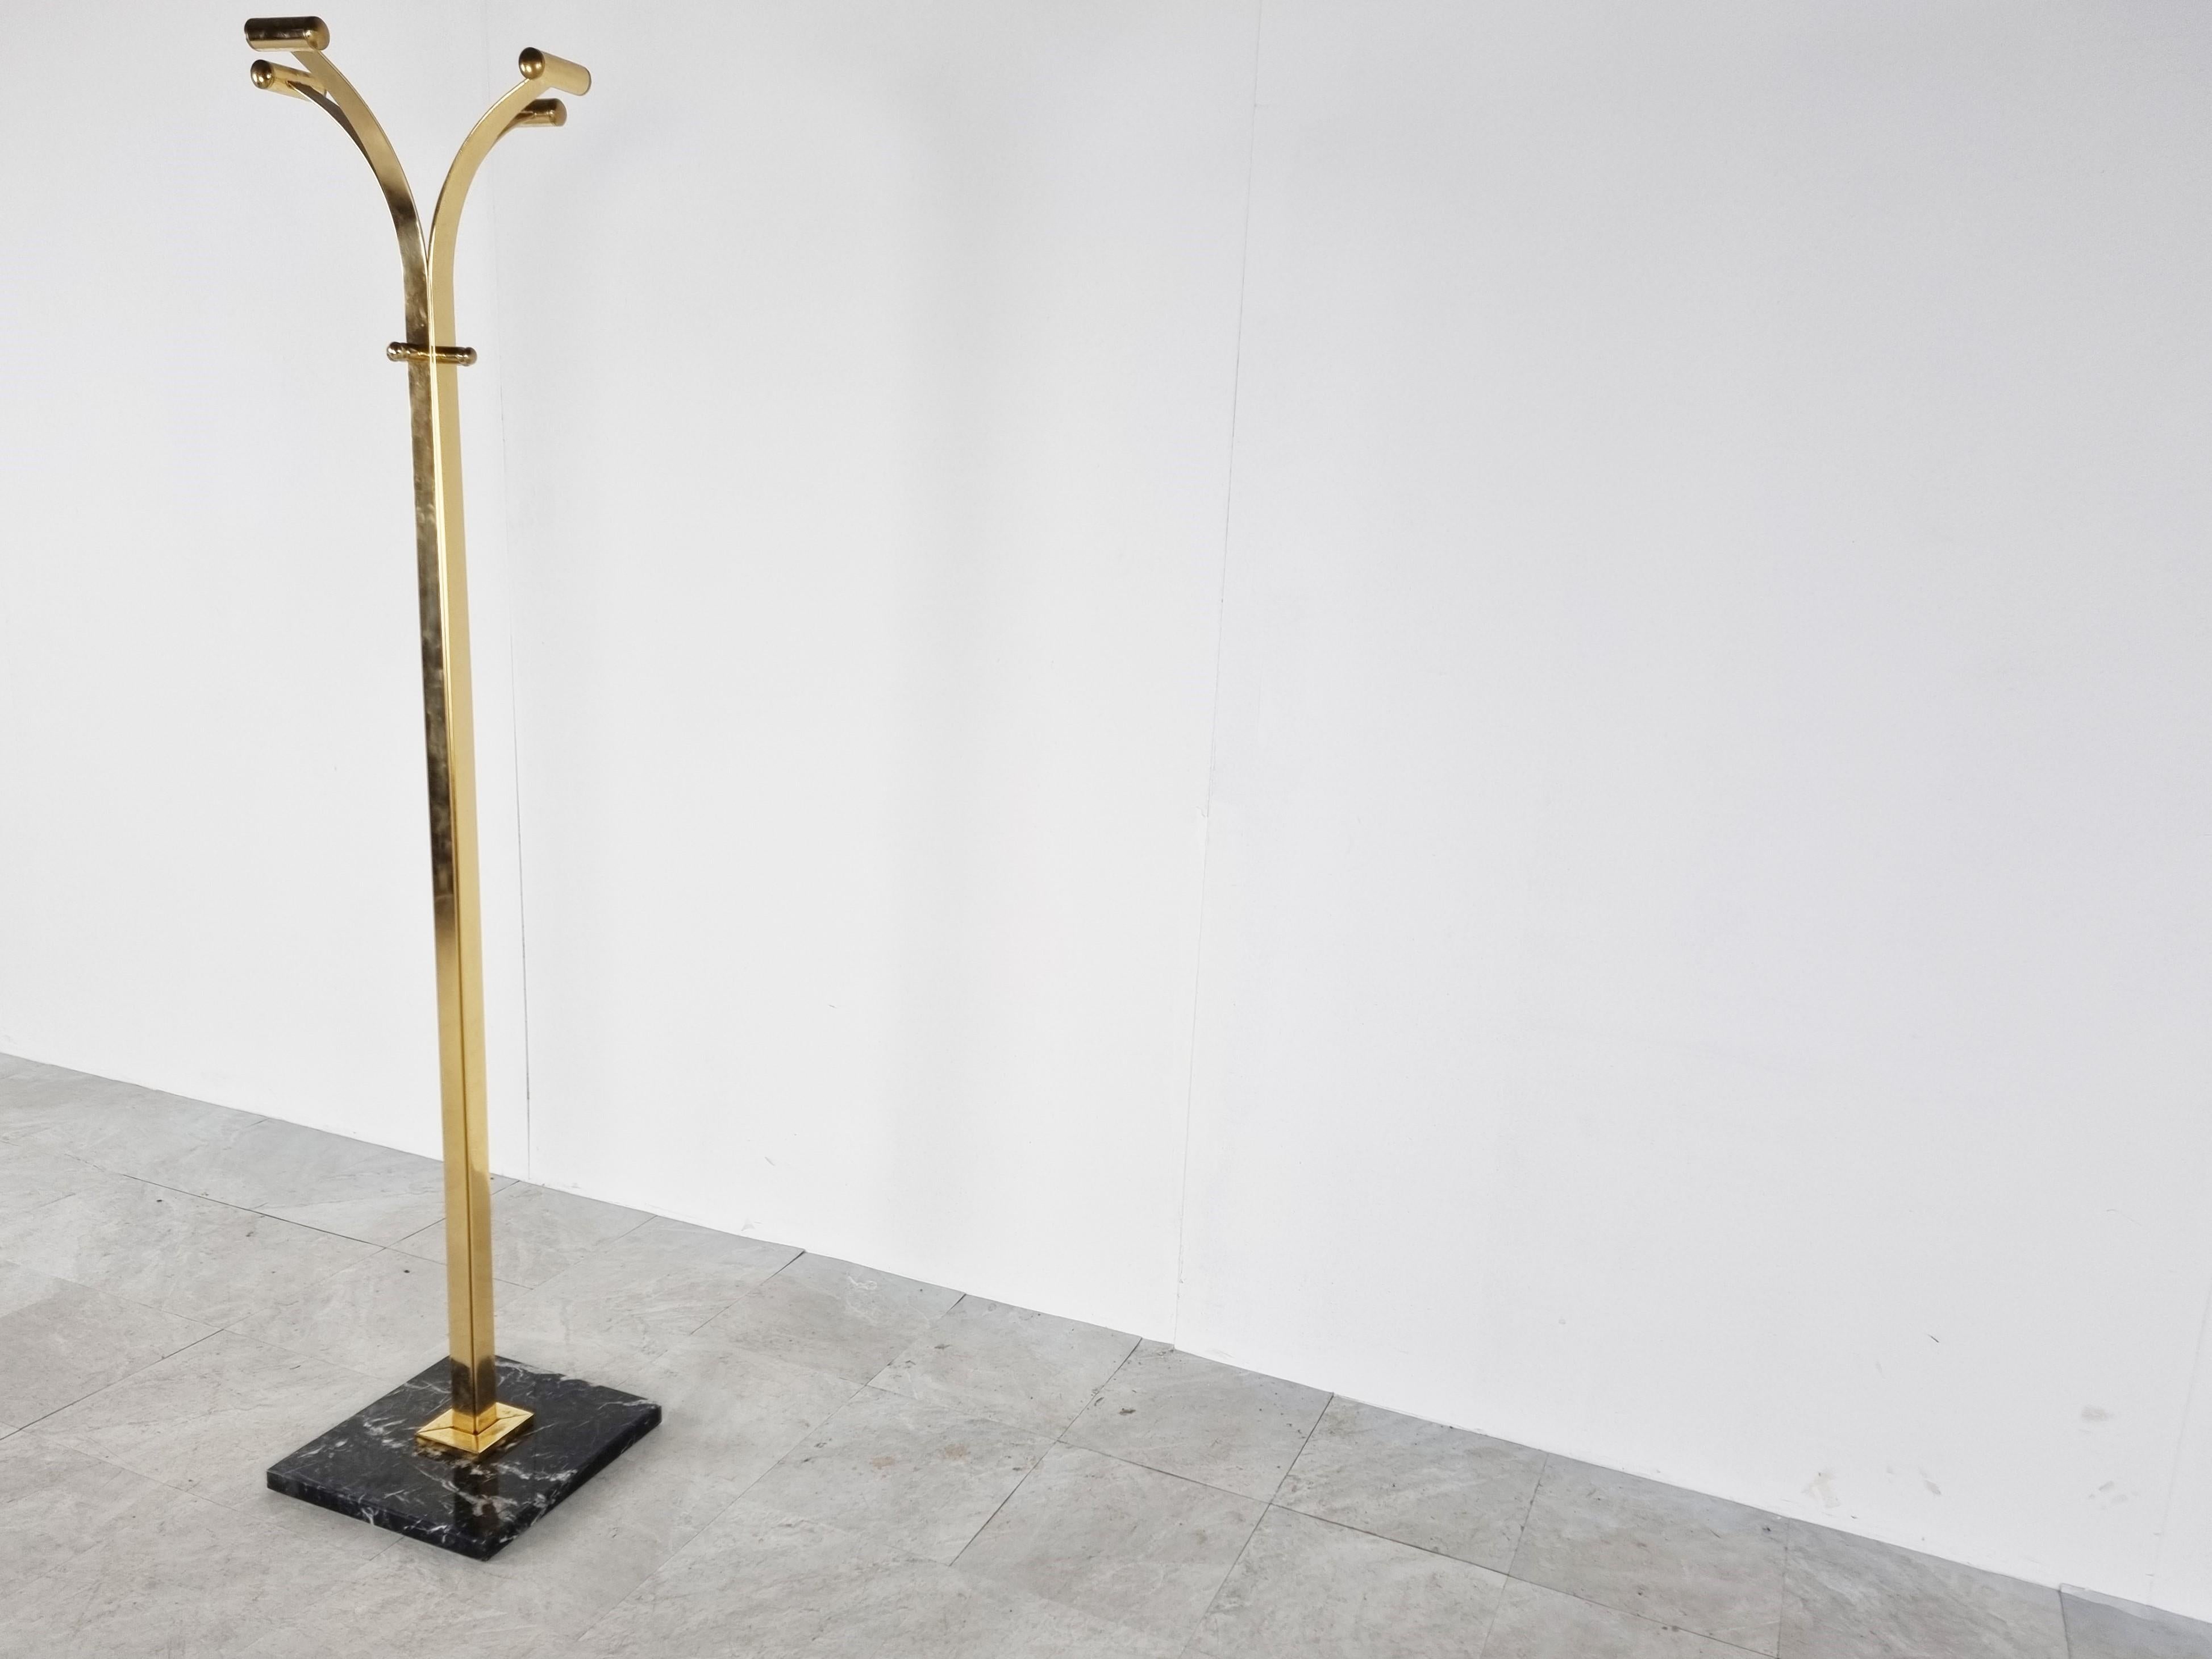 Modernist brass coat stand with a black marble base providing 4 hooks.

Elegant design.

Good overall condition, one of the arms has some brass loss on the inside.

1970s - Italy

Dimensions:
Height: 170cm/66.92